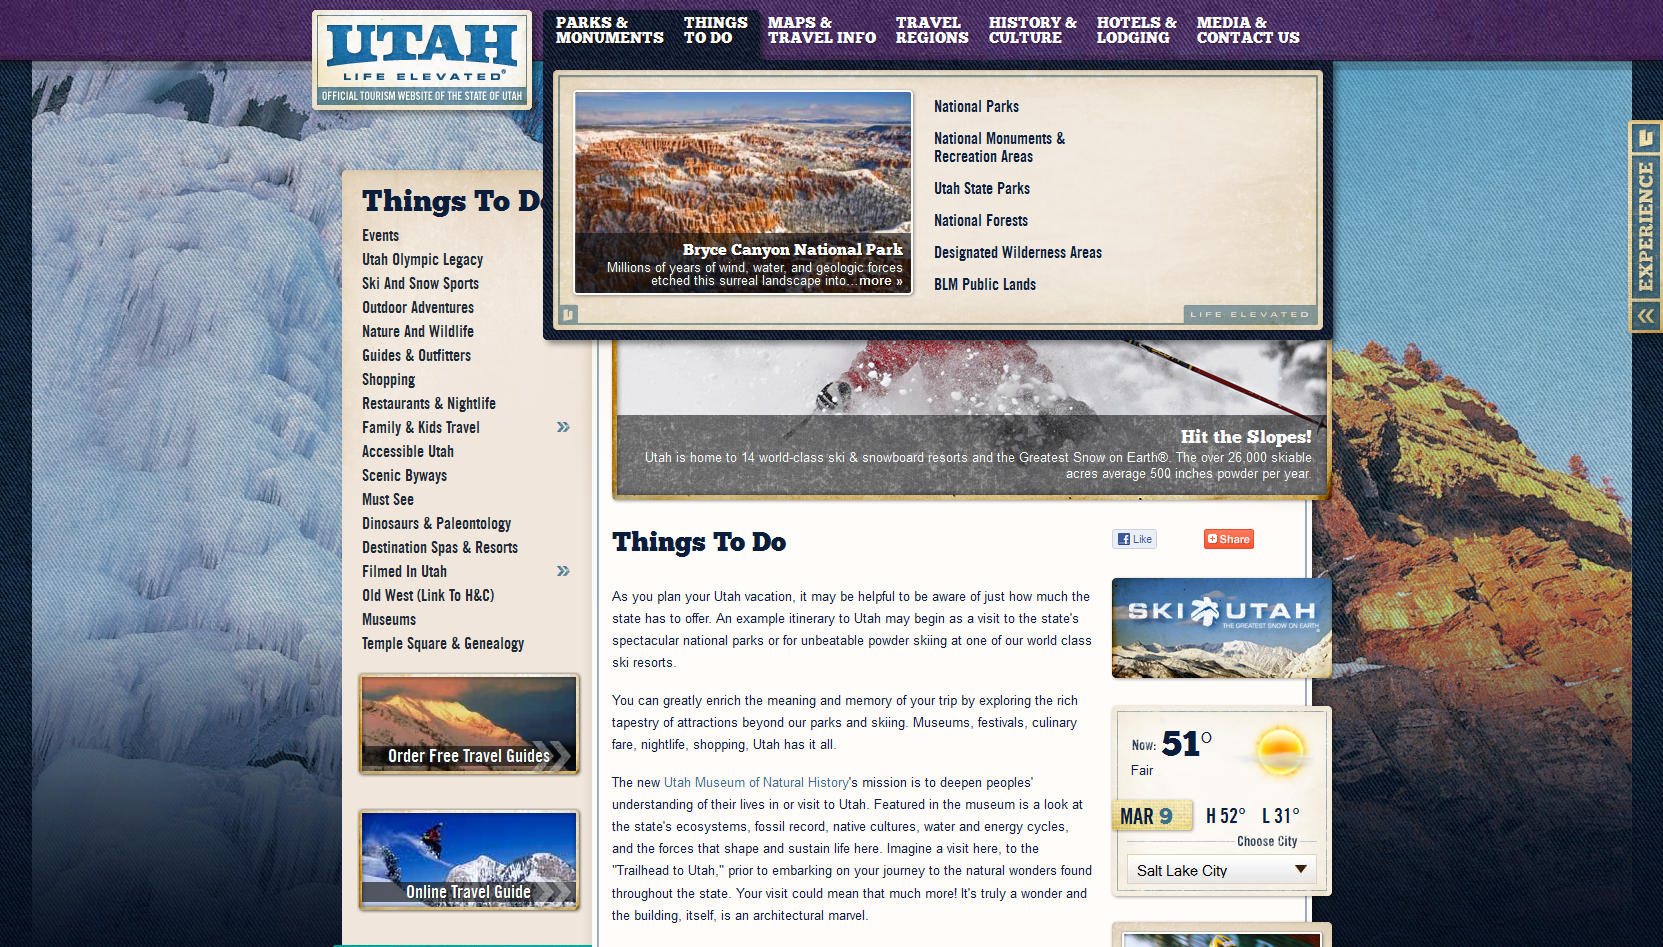 Utah Tourism Website - March 2012 - Winter Imagery